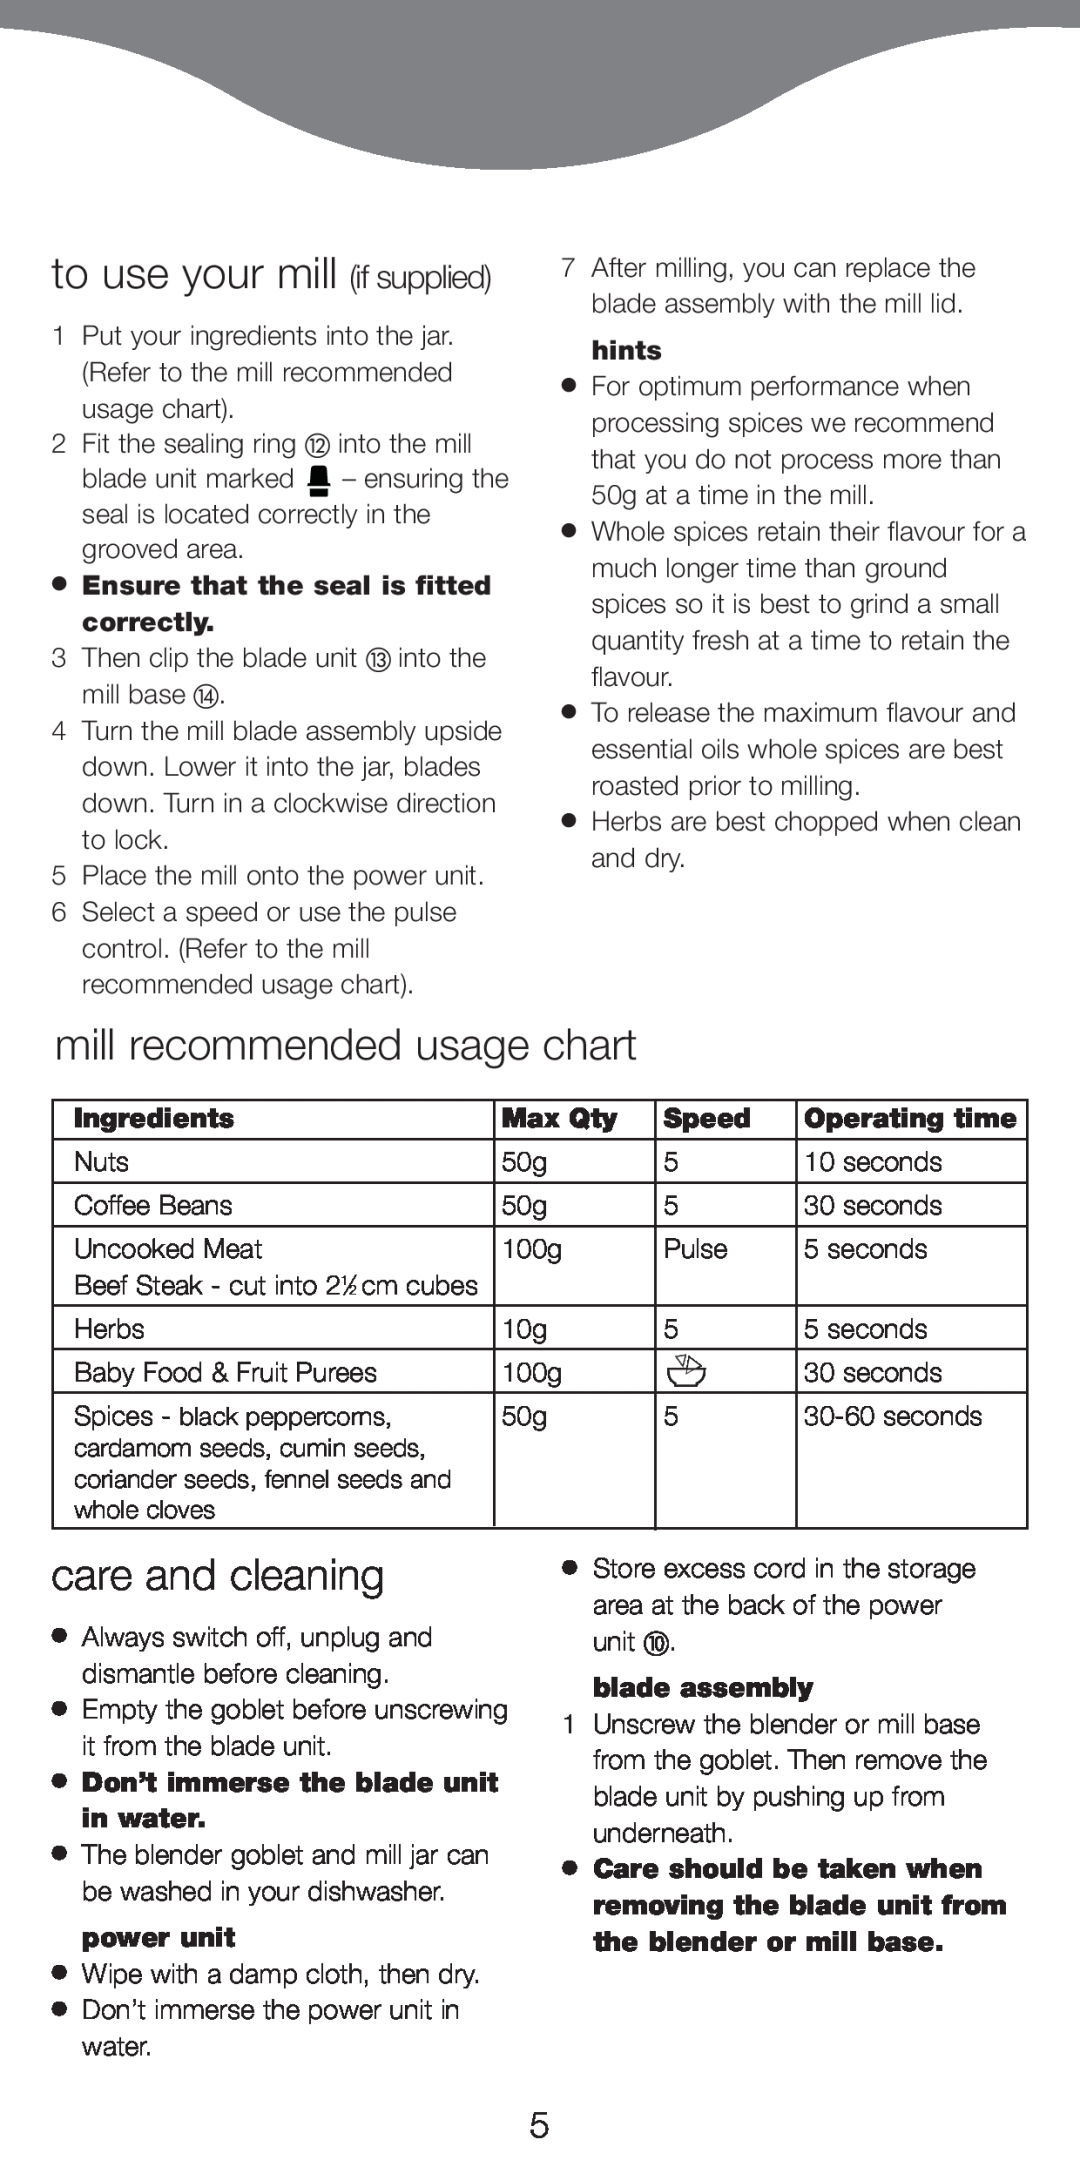 Kenwood BL760 to use your mill if supplied, mill recommended usage chart, care and cleaning, Ingredients, Max Qty, Speed 